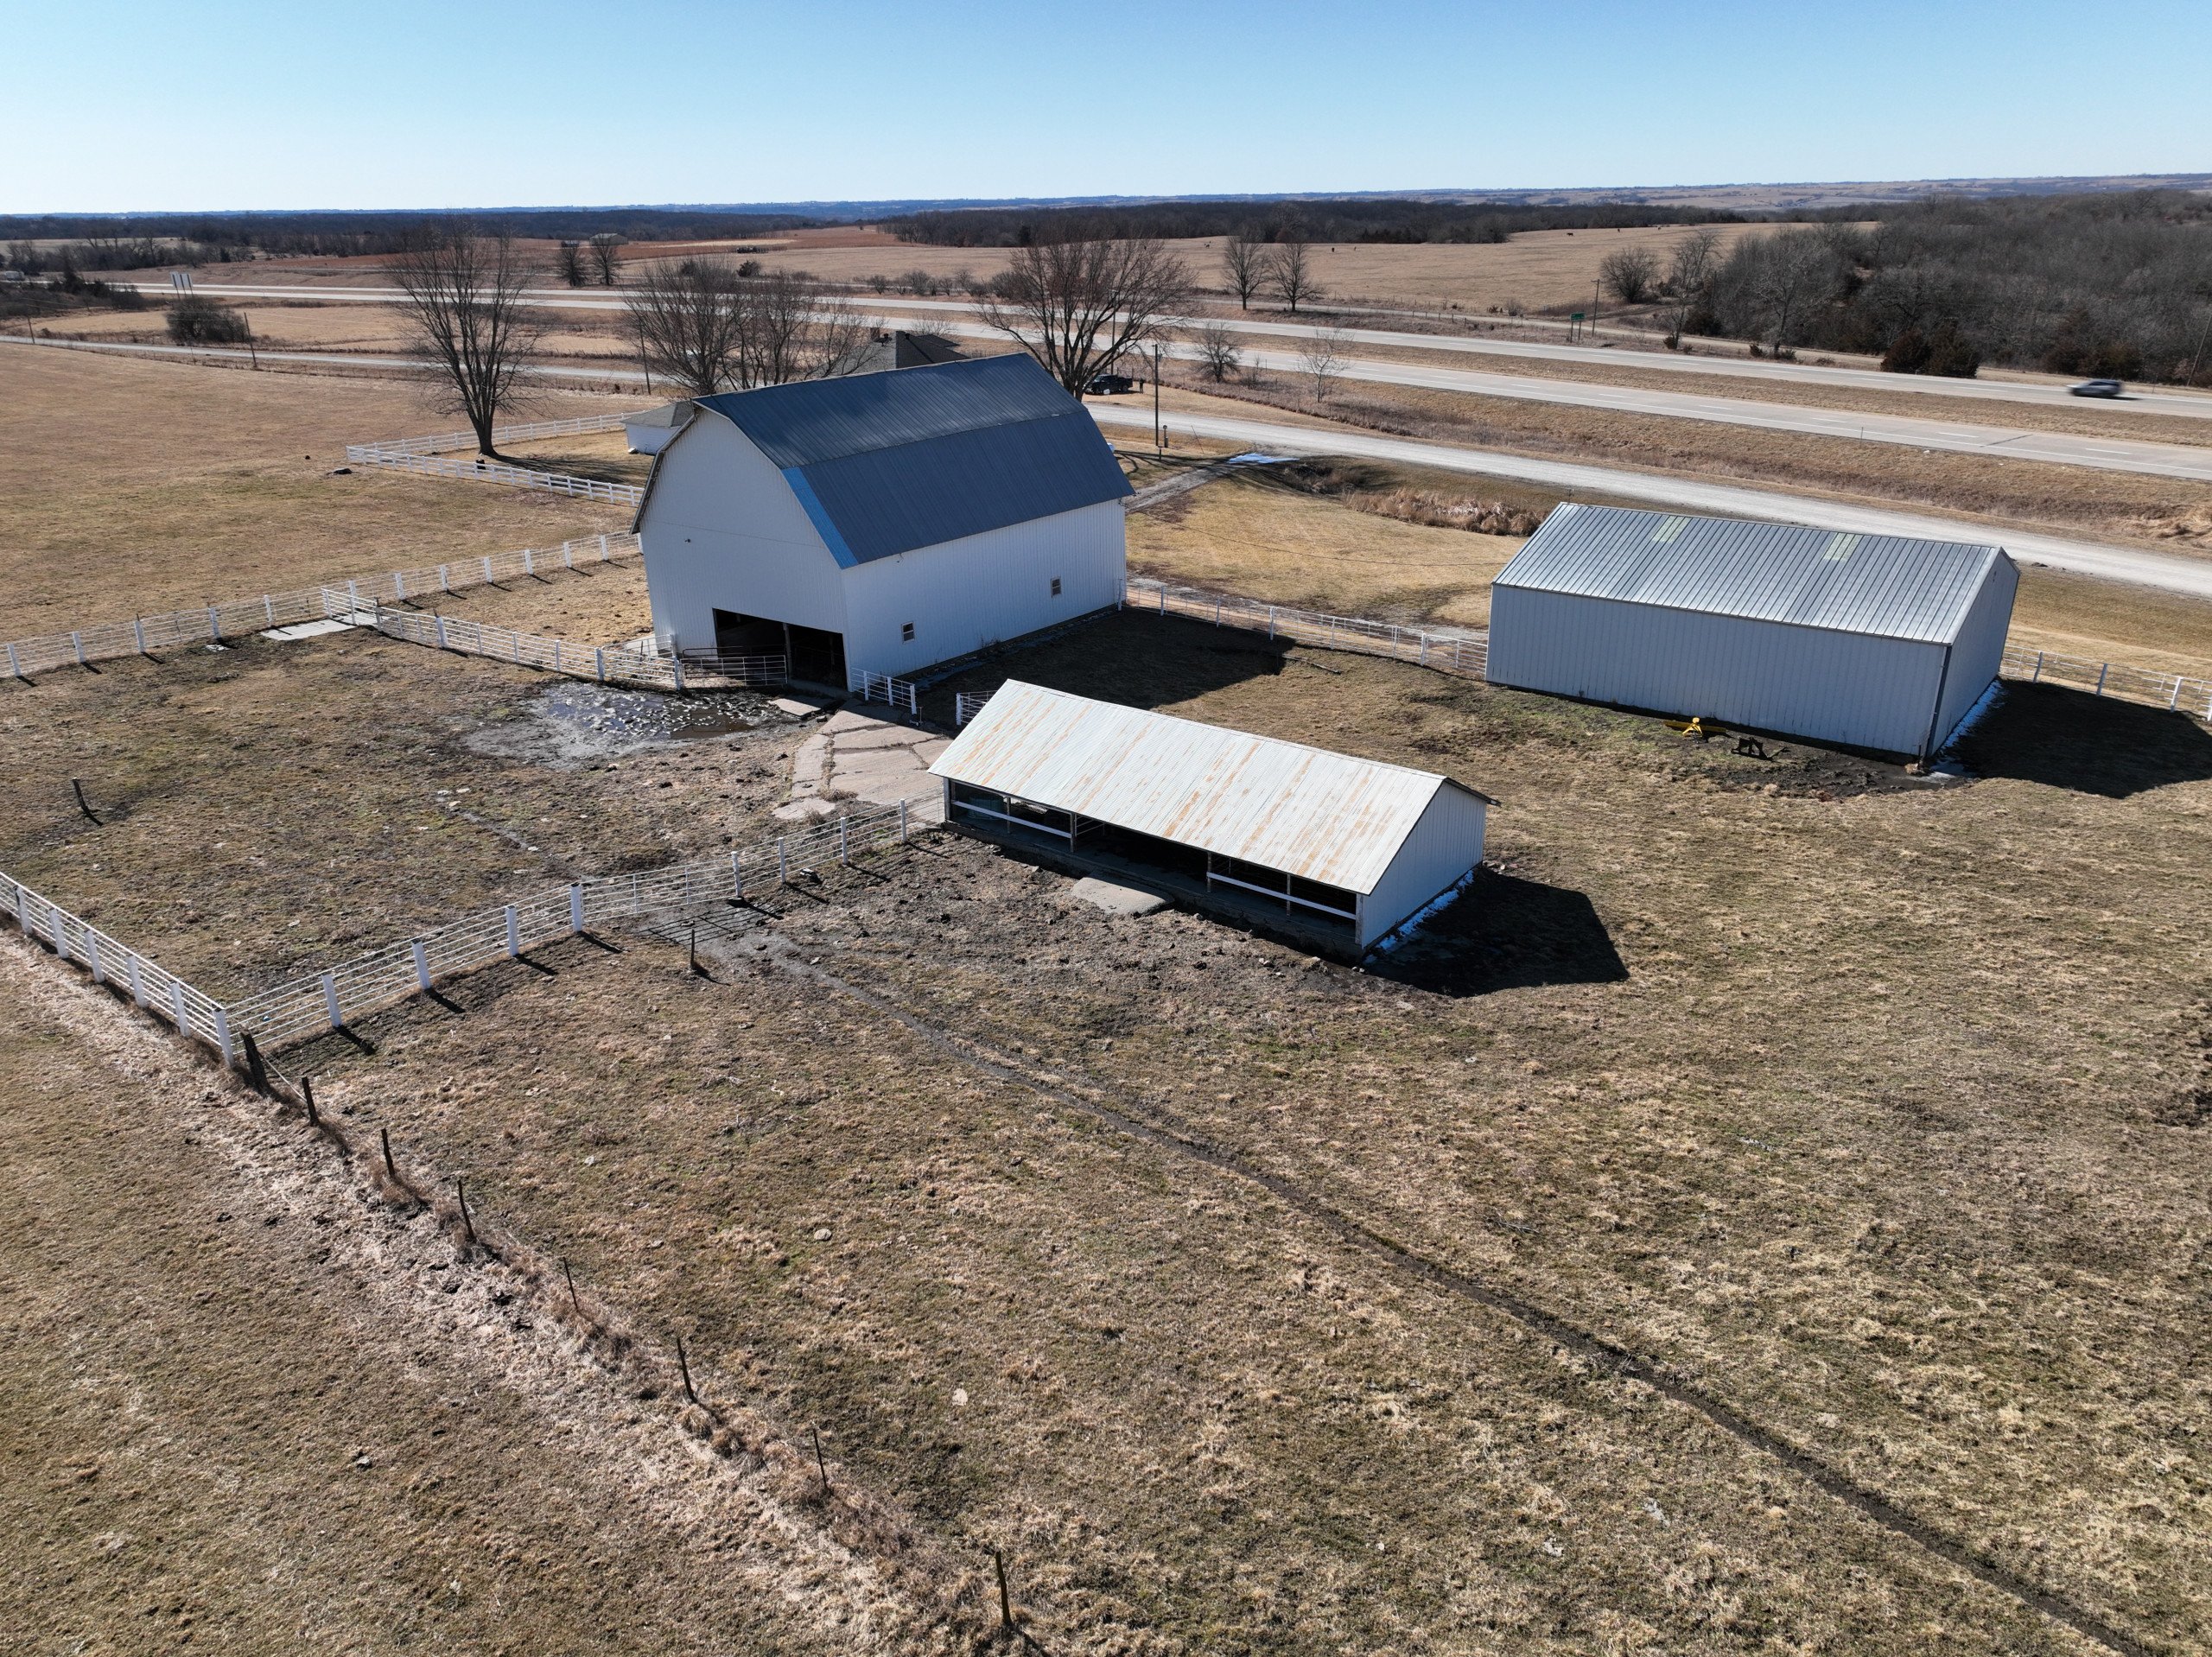 residential-decatur-county-iowa-20-acres-listing-number-16662-DJI_0069-1.jpg